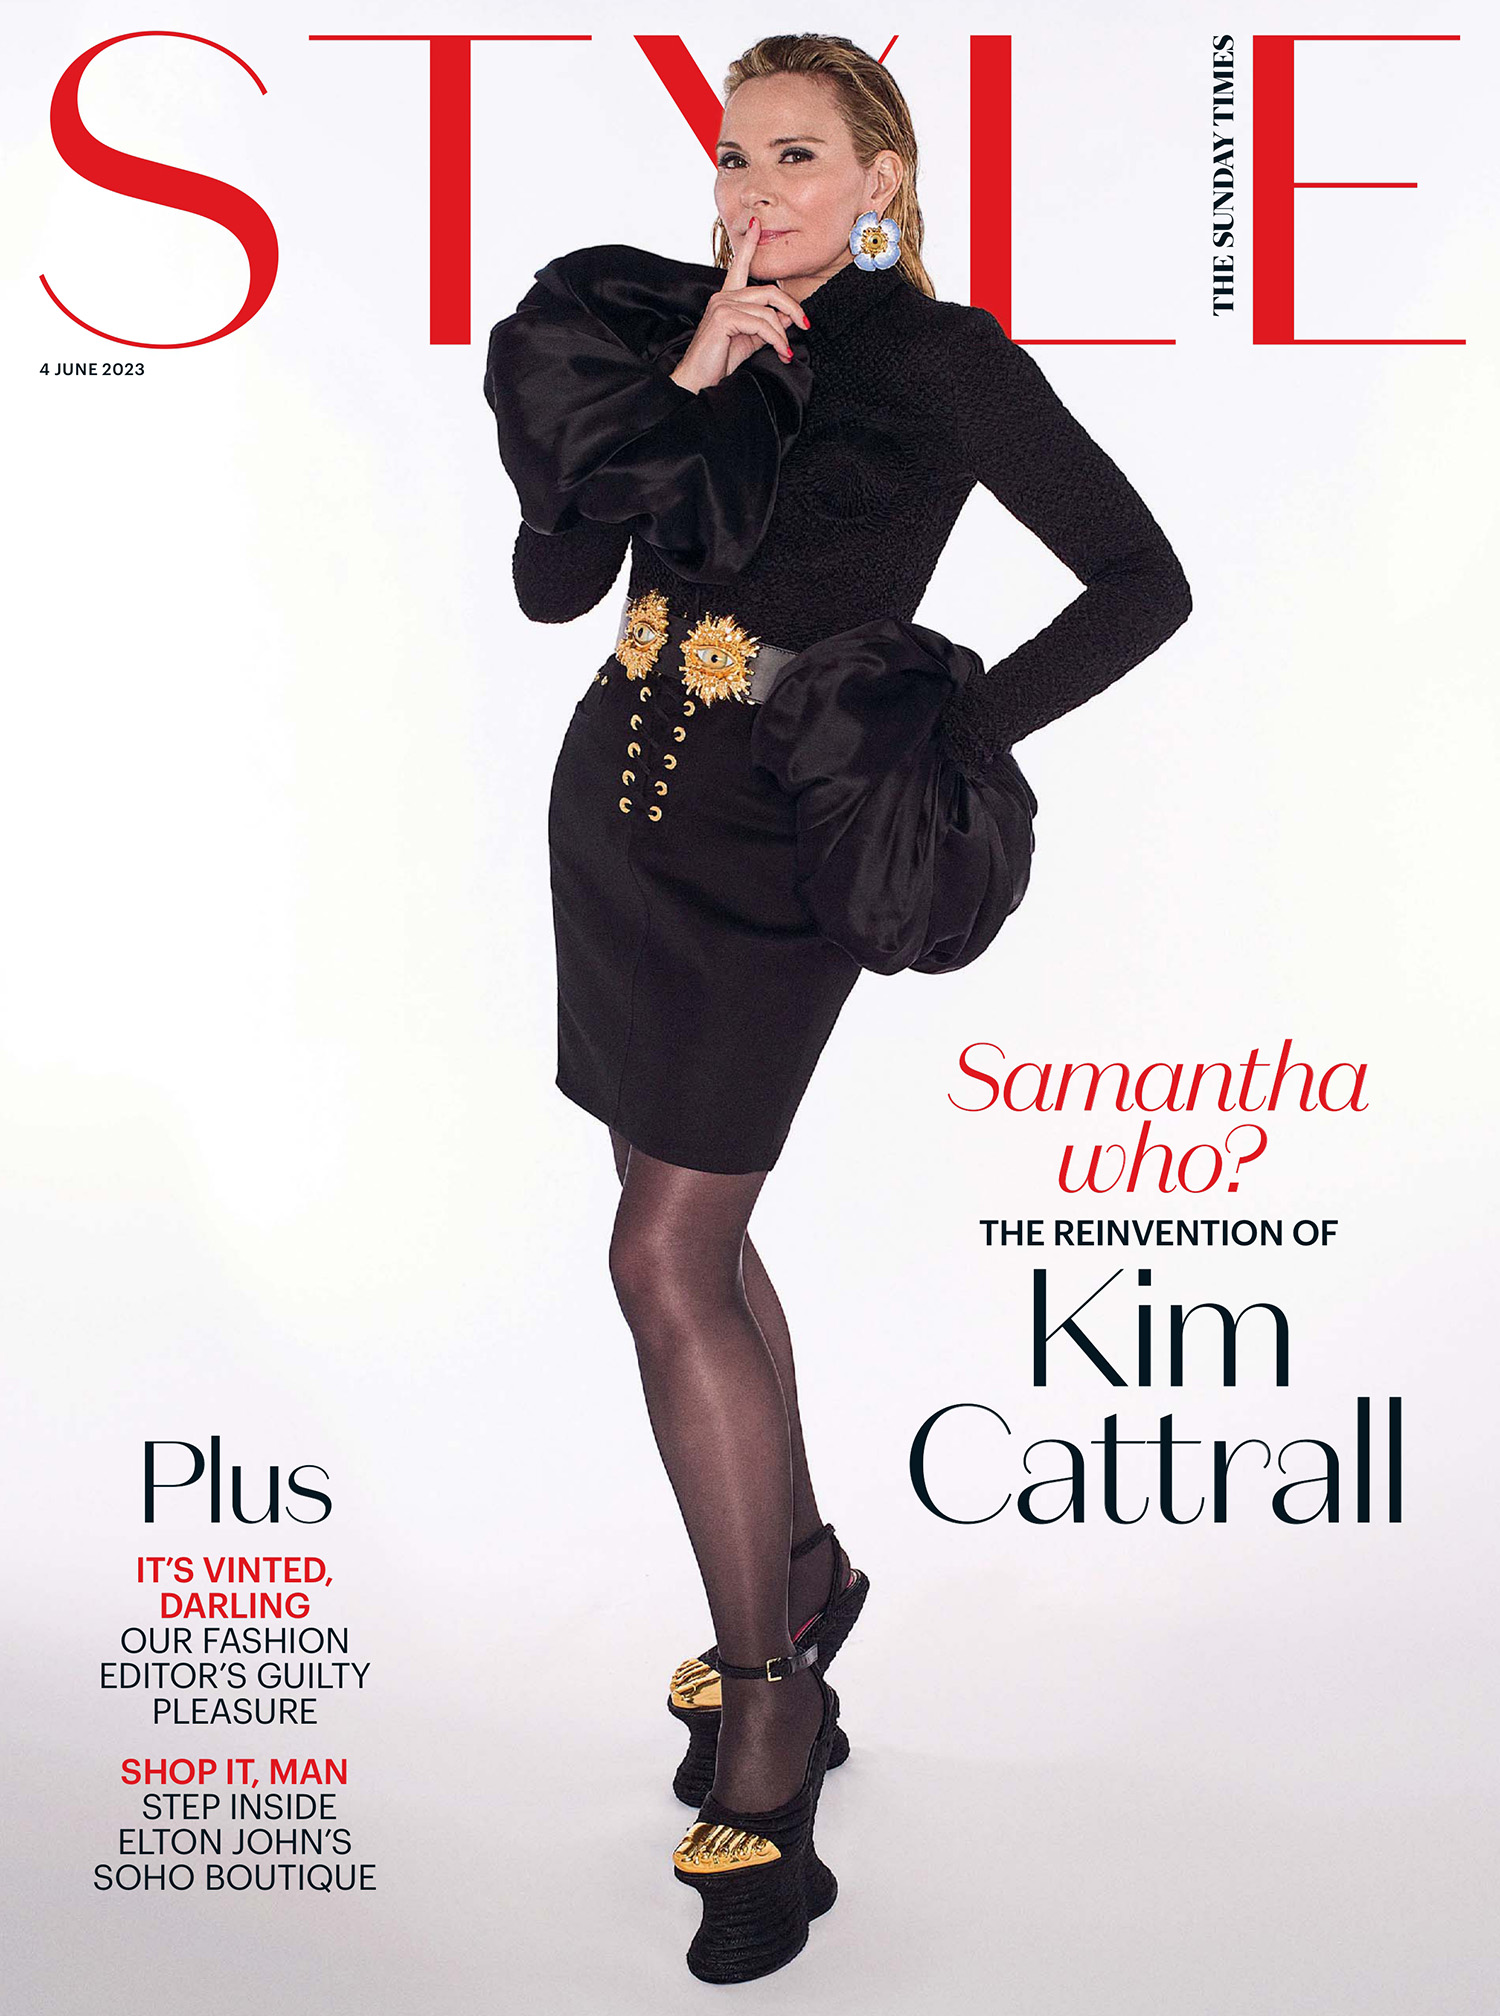 Kim Cattrall covers The Sunday Times Style June 4th, 2023 by Christian Soria